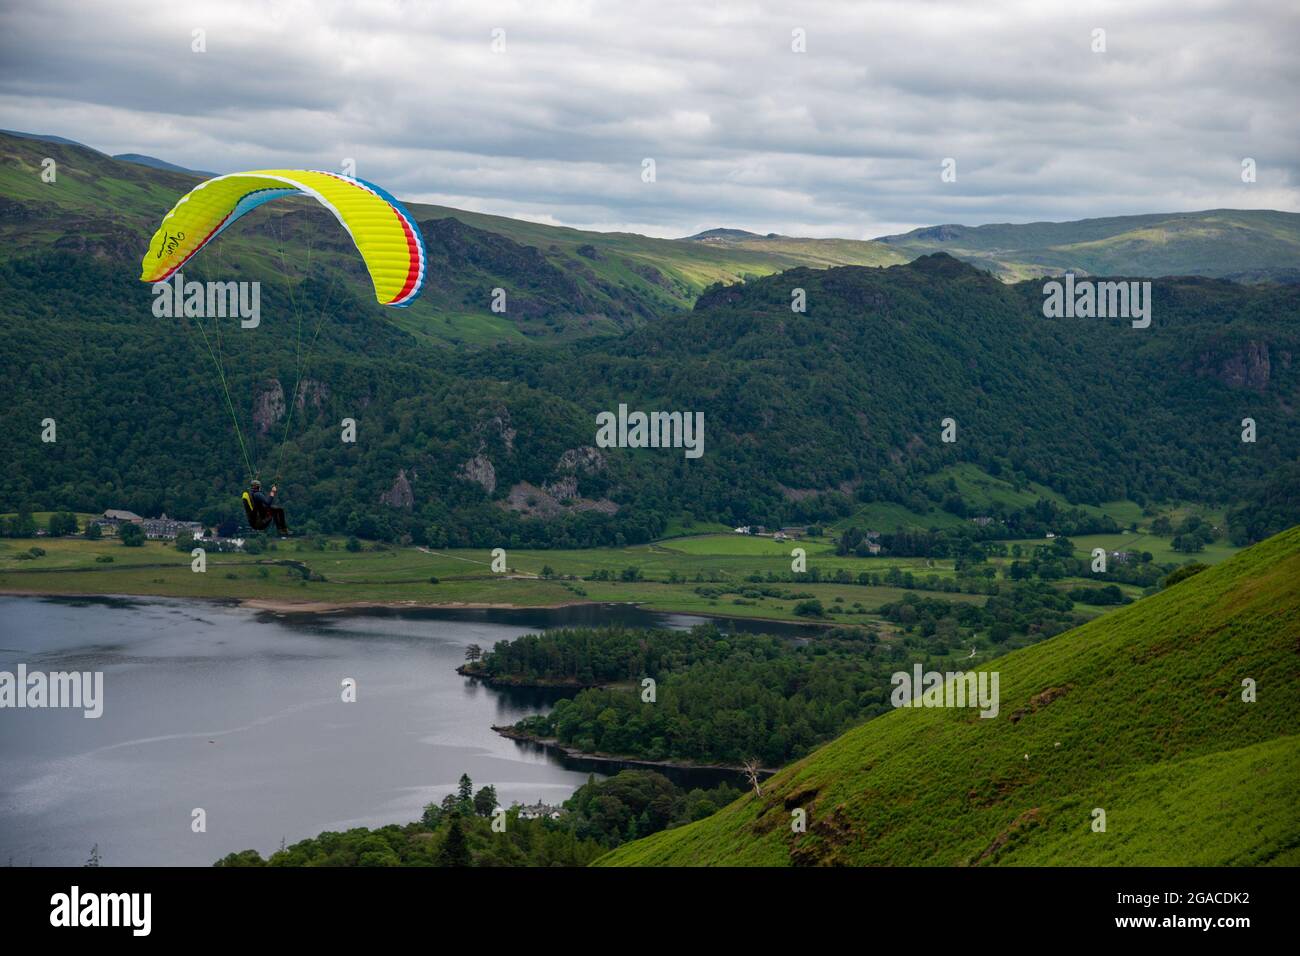 A lone Paraglider above Derwent water in the Lake District, UK Stock Photo